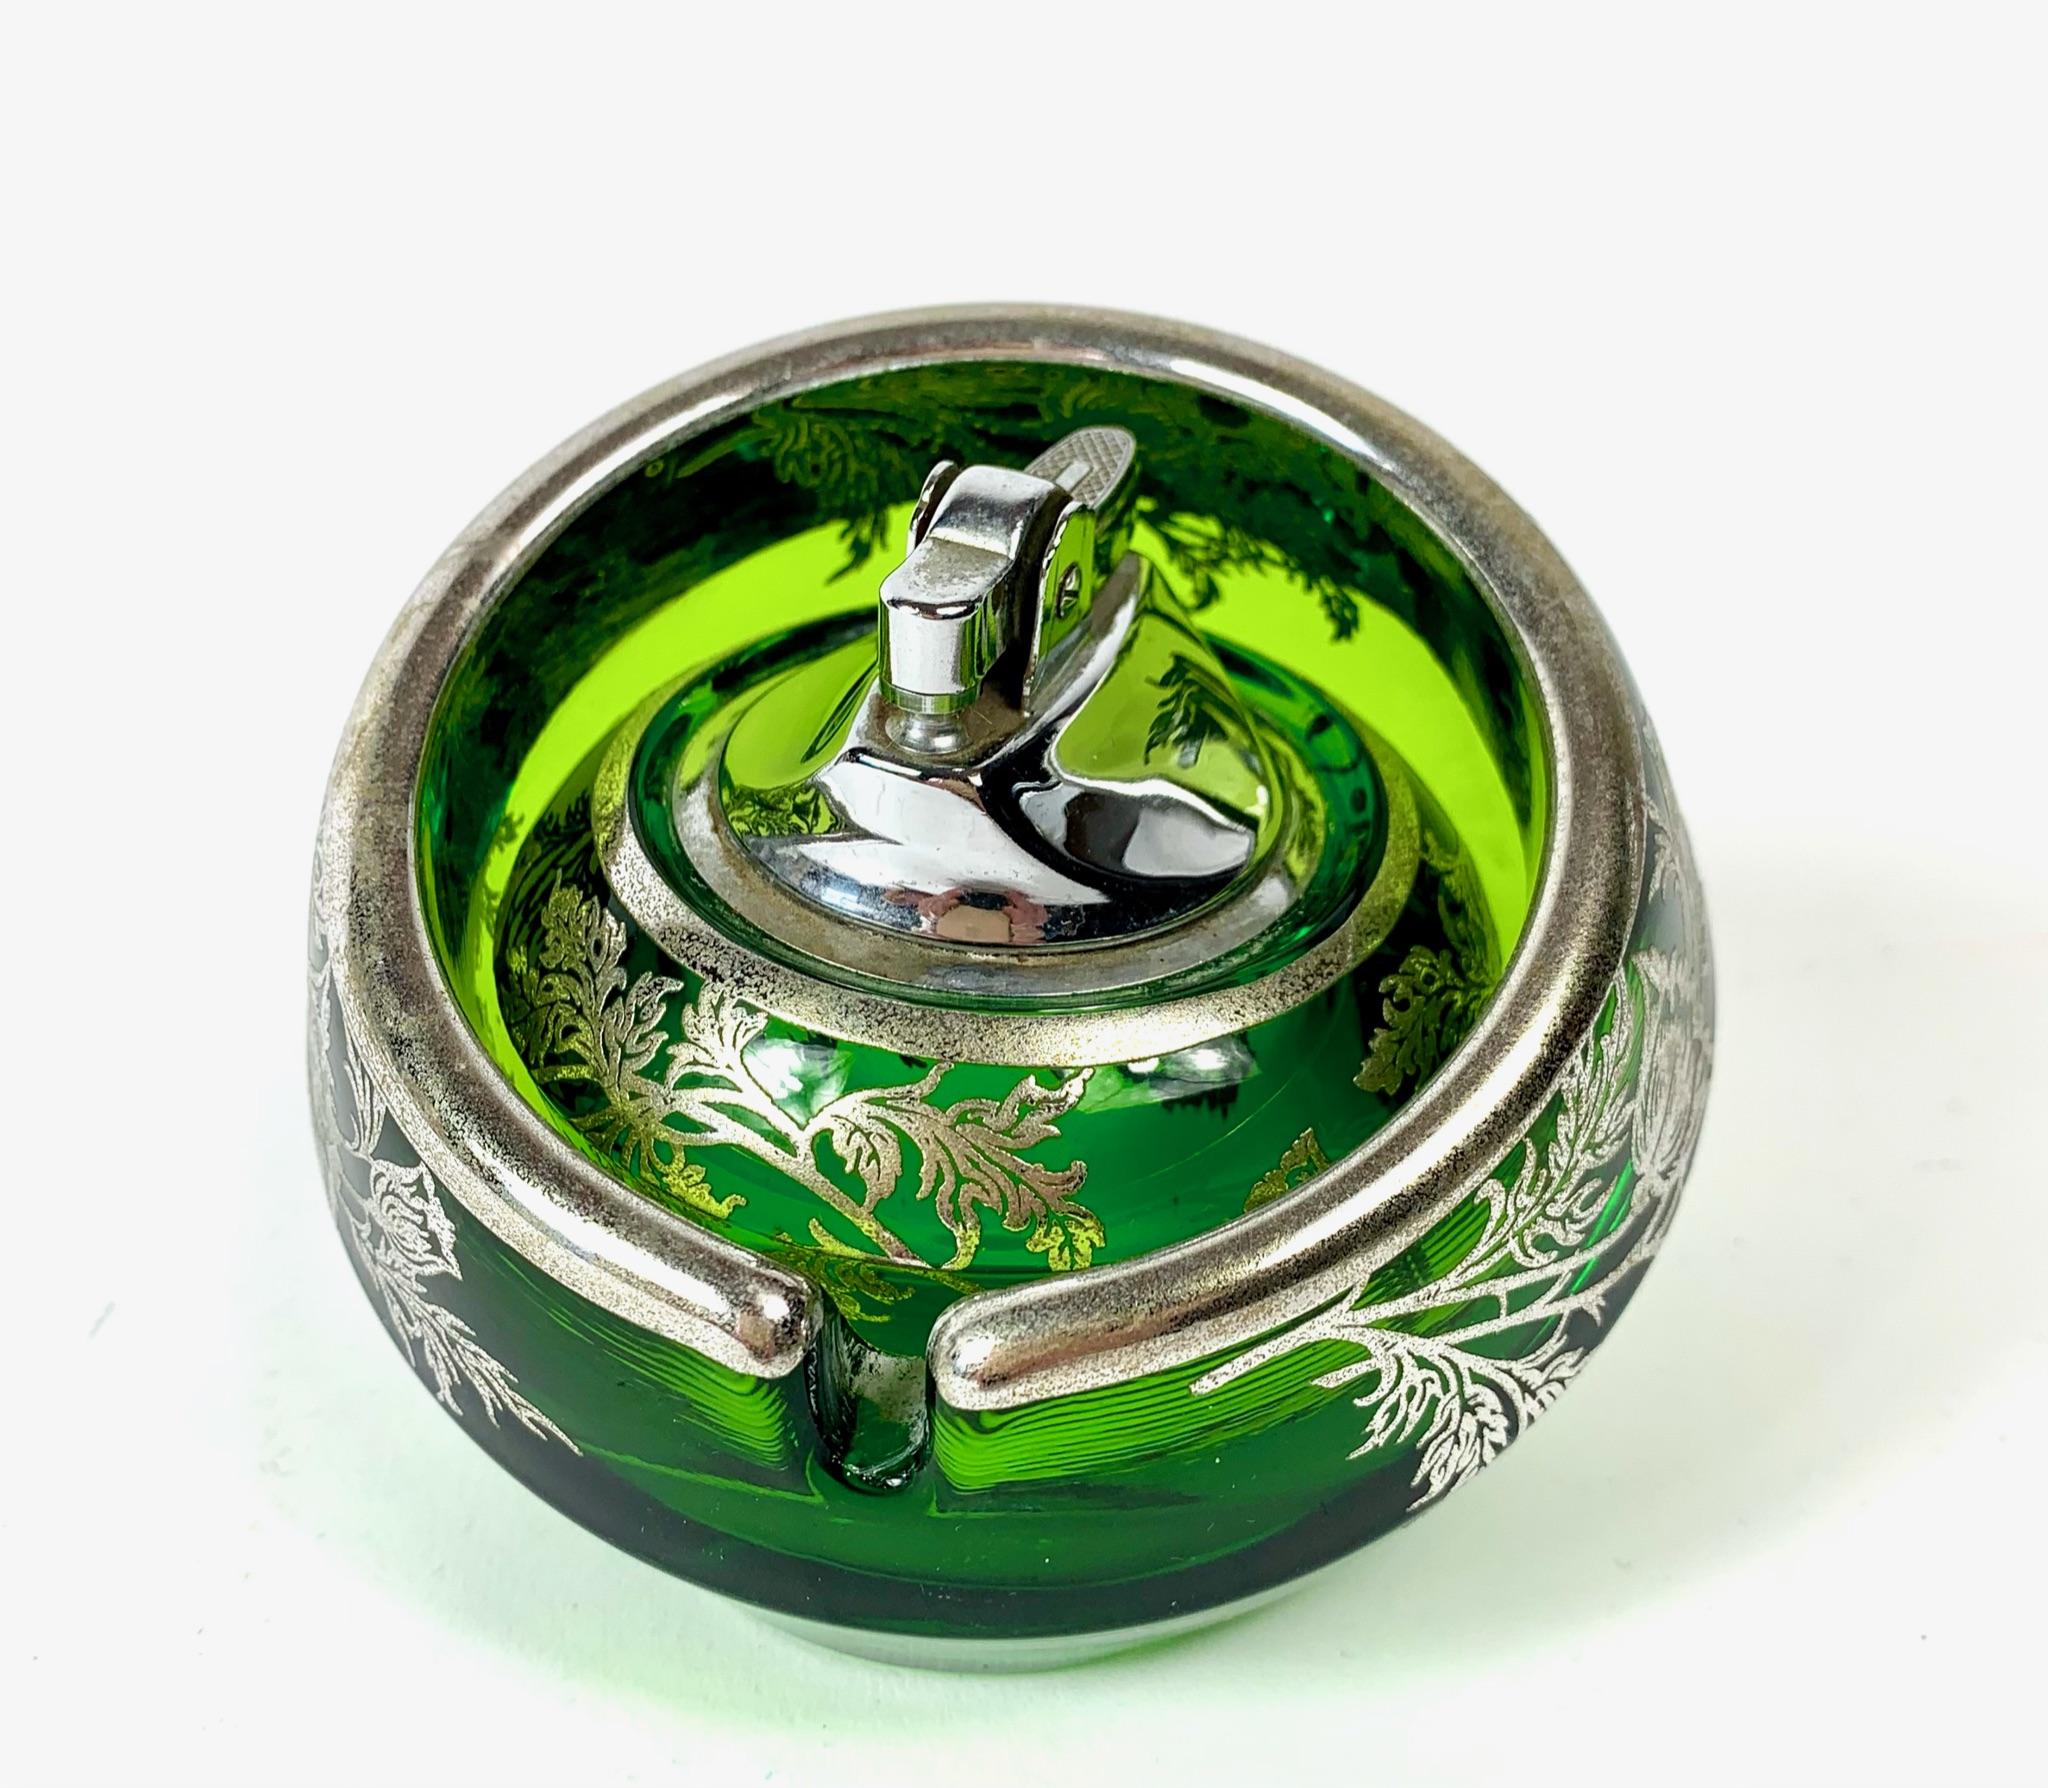 Stunning Mid-Century Modern art glass orb shaped ashtray with matching lighter made by Viking Art Glass from the 1950s 1960s. The thick green glass is decorated with a sterling silver floral pattern called 